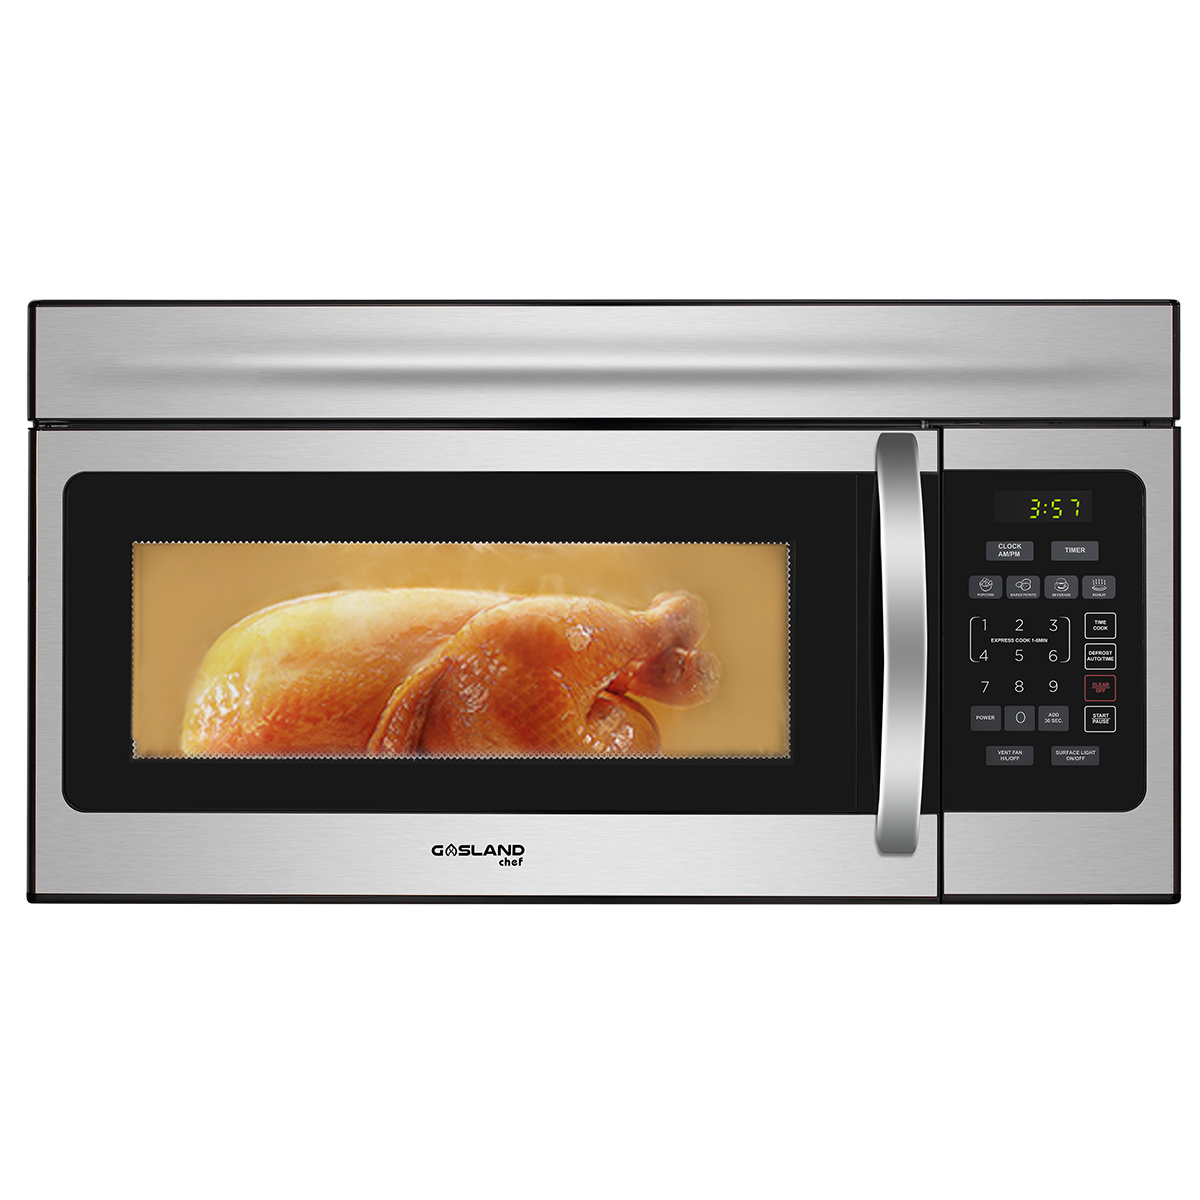 GASLAND Chef 30" over-the-Range Microwave Oven 1.6 cu.ft., 300 CFM in Stainless Steel - image 1 of 7